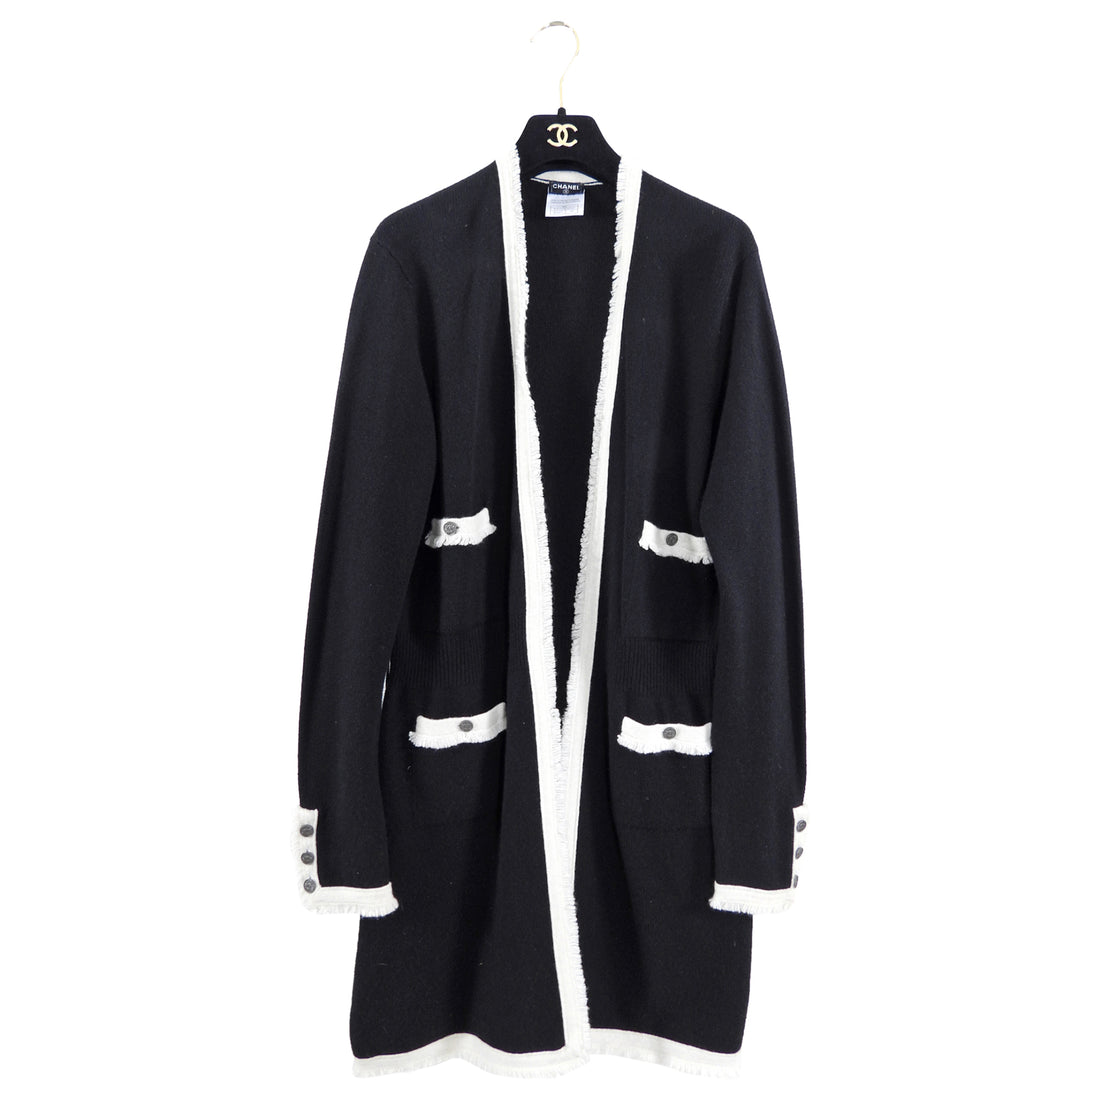 Chanel 06A Black and White Cashmere Long Cardigan Sweater - FR44 / L